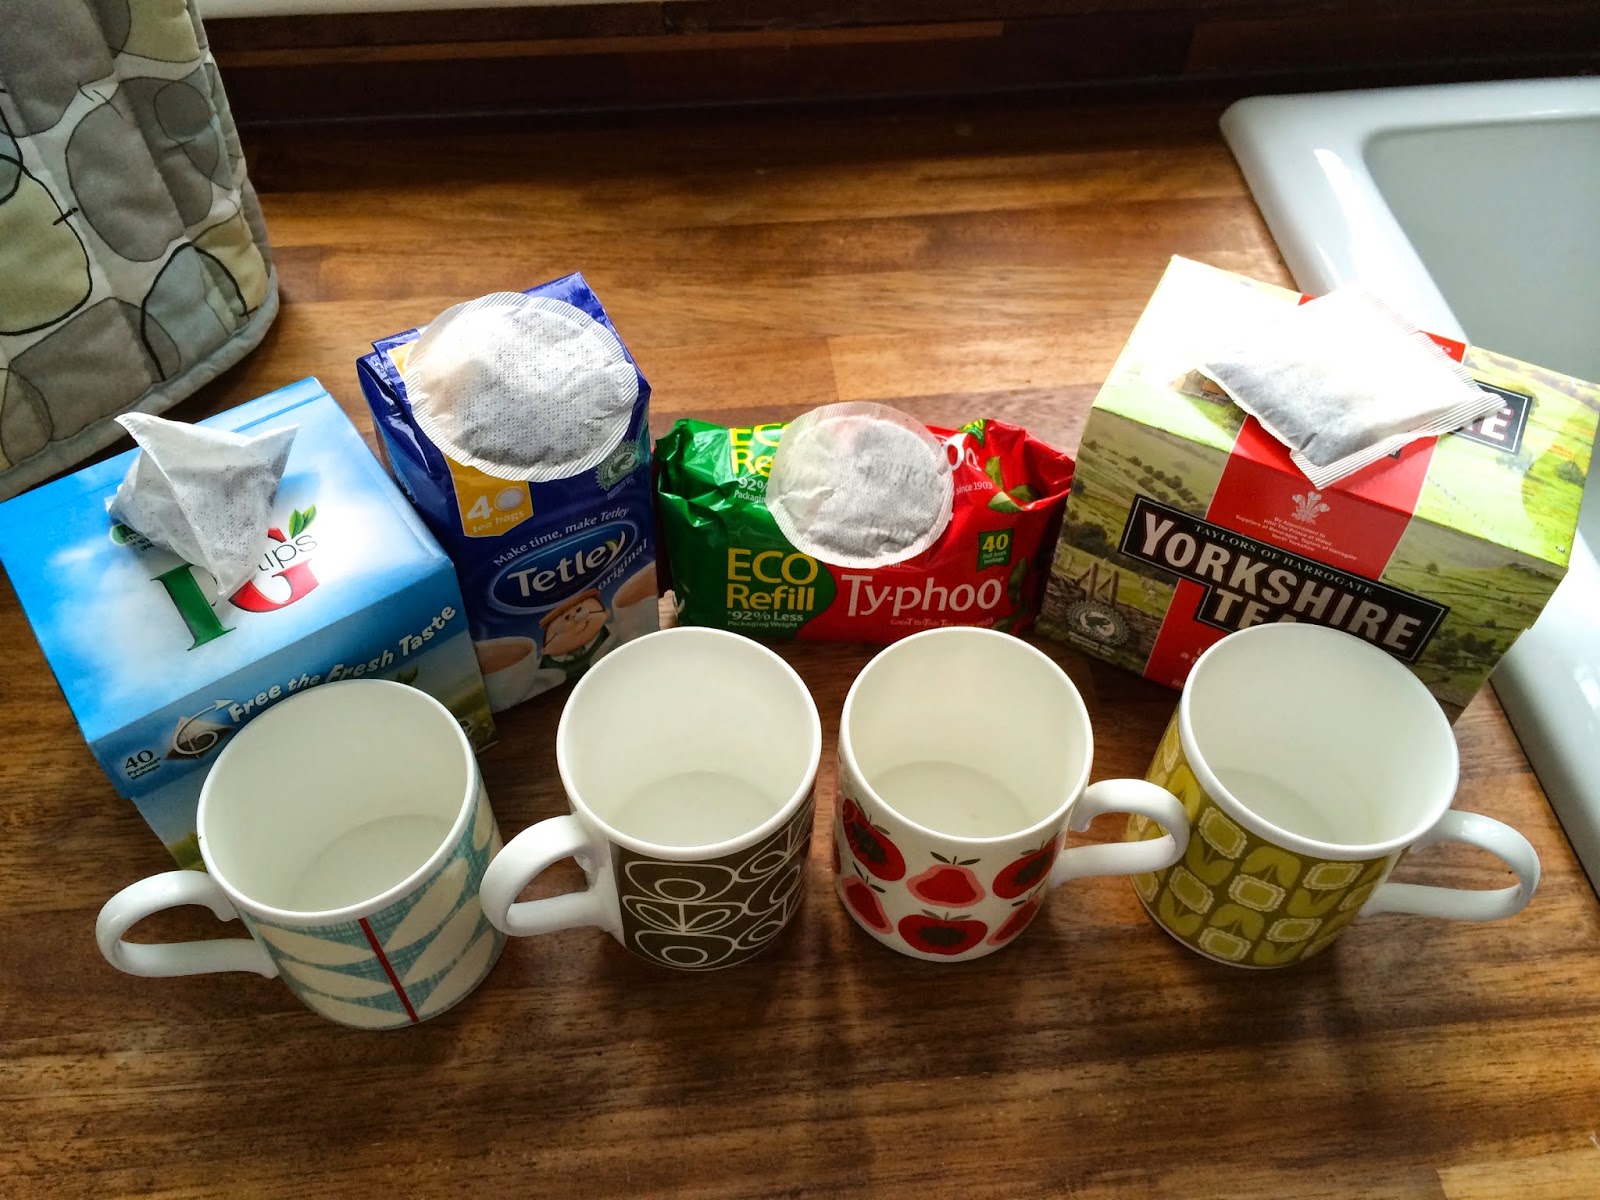 PG Tips vs Yorkshire Tea vs Twinings: Which test the biggest tea